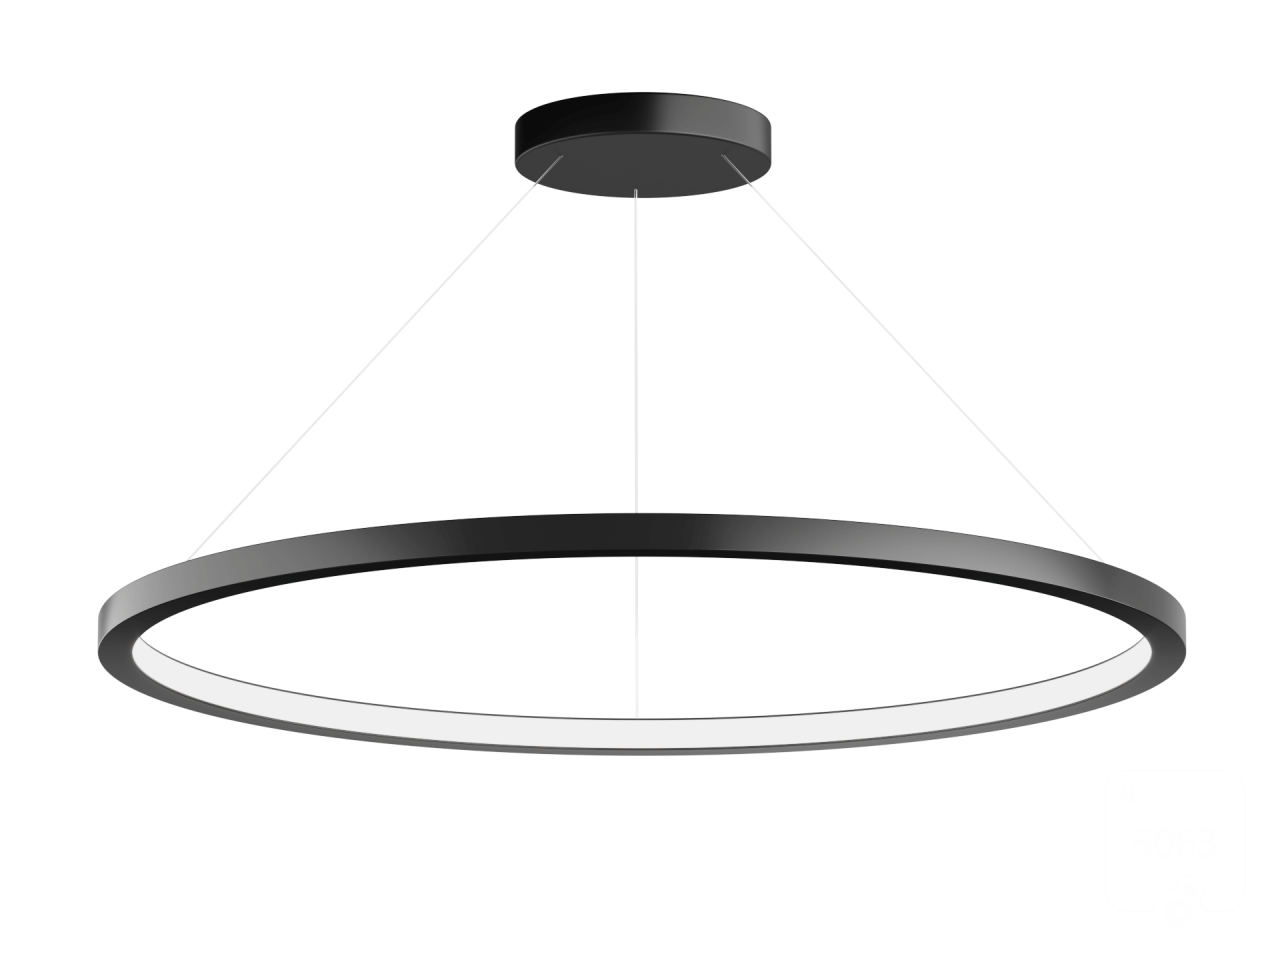 Pendant LED ring light with a diameter of 42.5 cm to 155 cm. A modern, stylish chandelier - a designer LED chandelier in the shape of a ring. This designer chandelier is ideal for interiors in the style of modern, loft, high-tech.